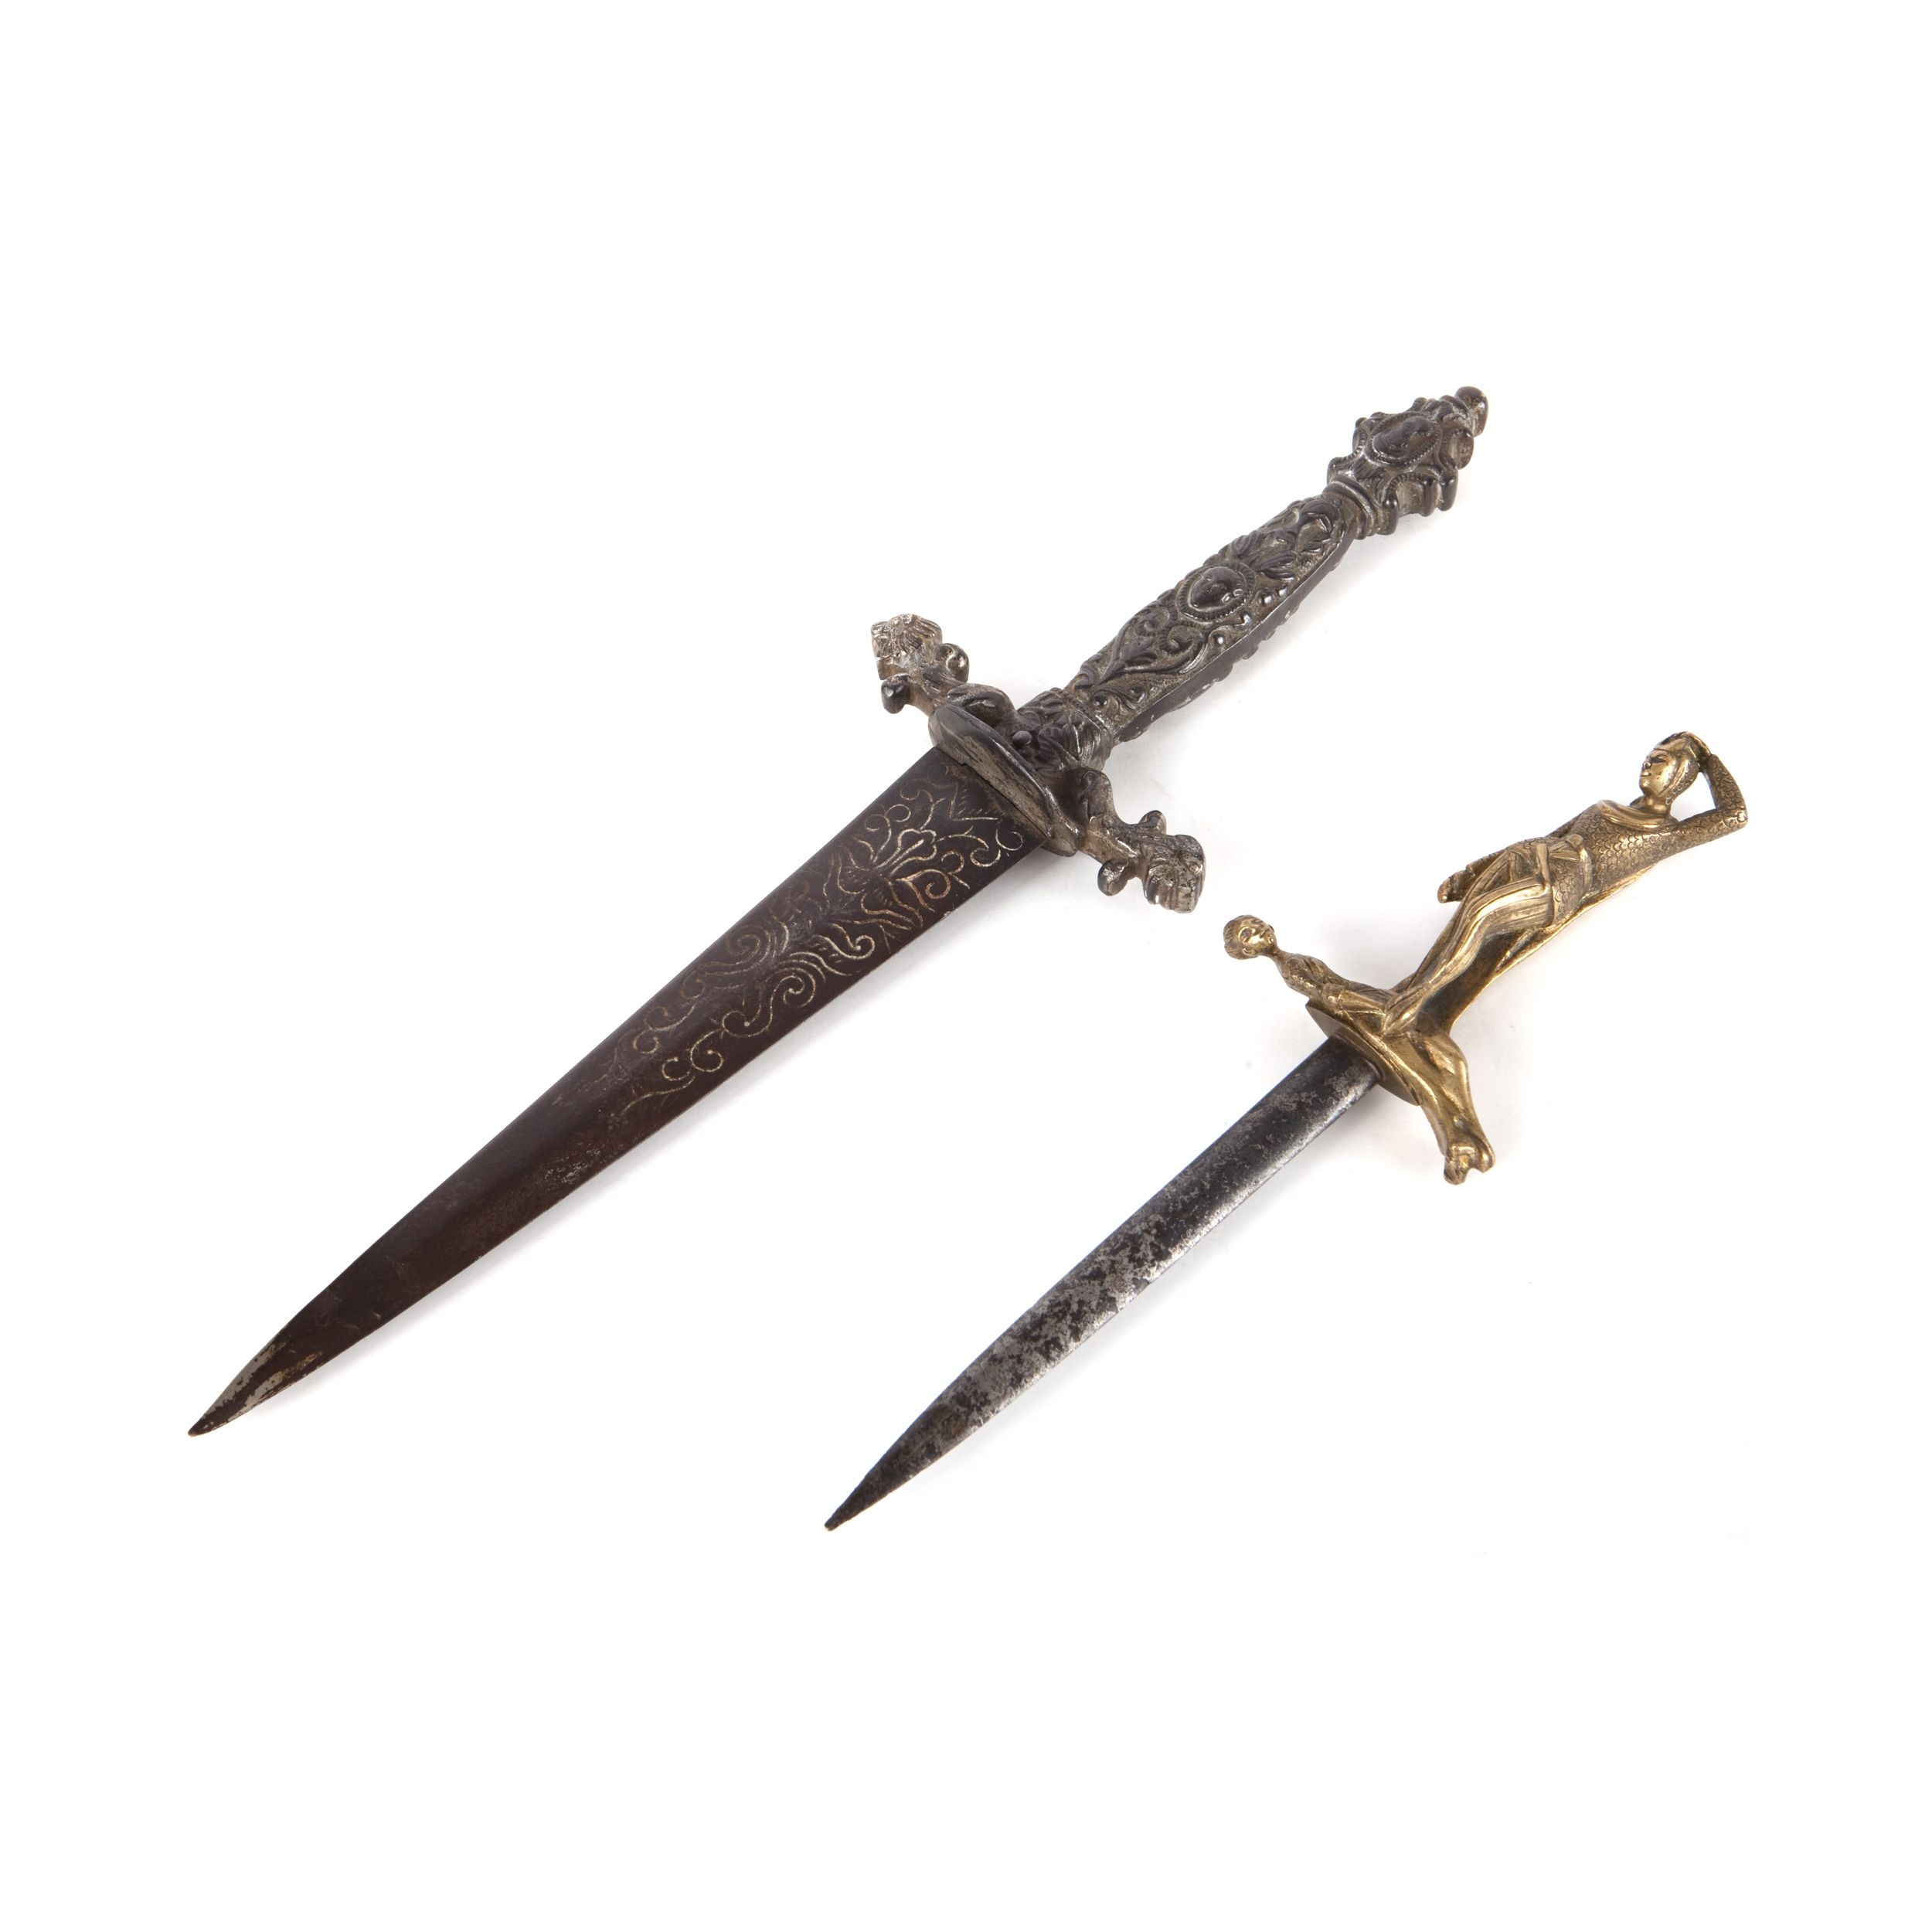 Two bronze daggers, Neo-Gothic Style, Late 19th Century - Expertissim